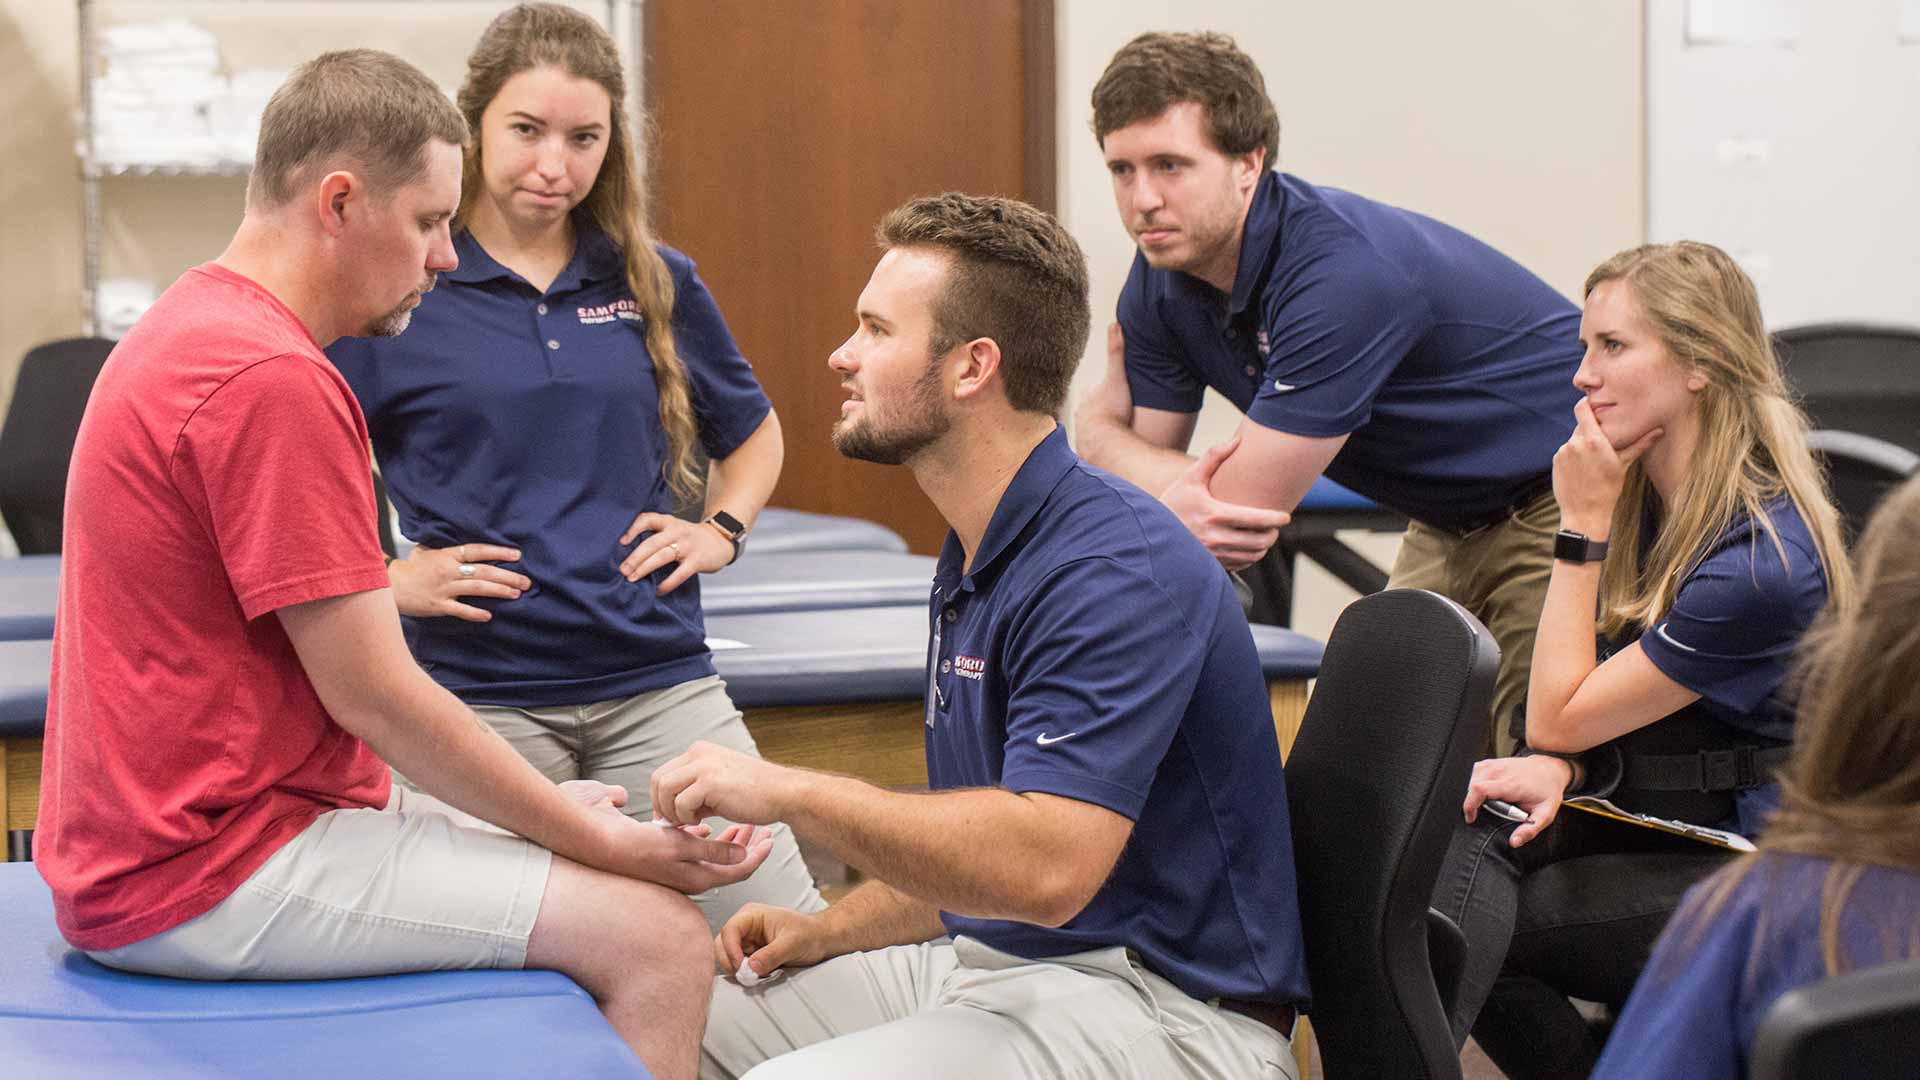 doctor of physical therapy schools